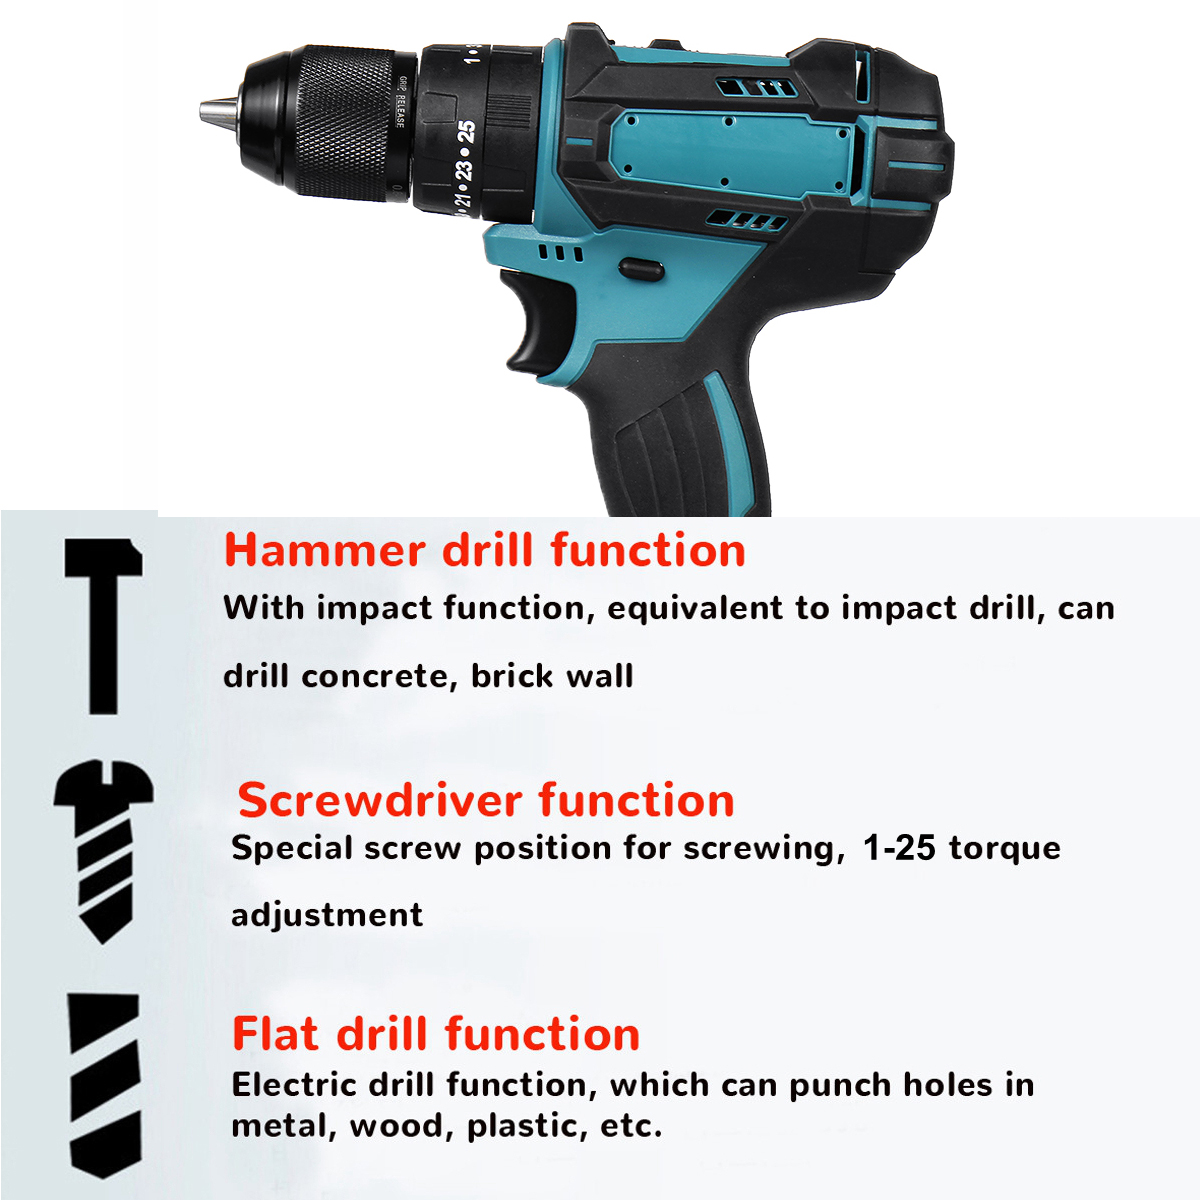 350Nm-4000-rpm-Electric-drill-3-In-1-Hammer-Flat-Drill-Screwdriver-Churn-Drill-with-Battery-1955074-5